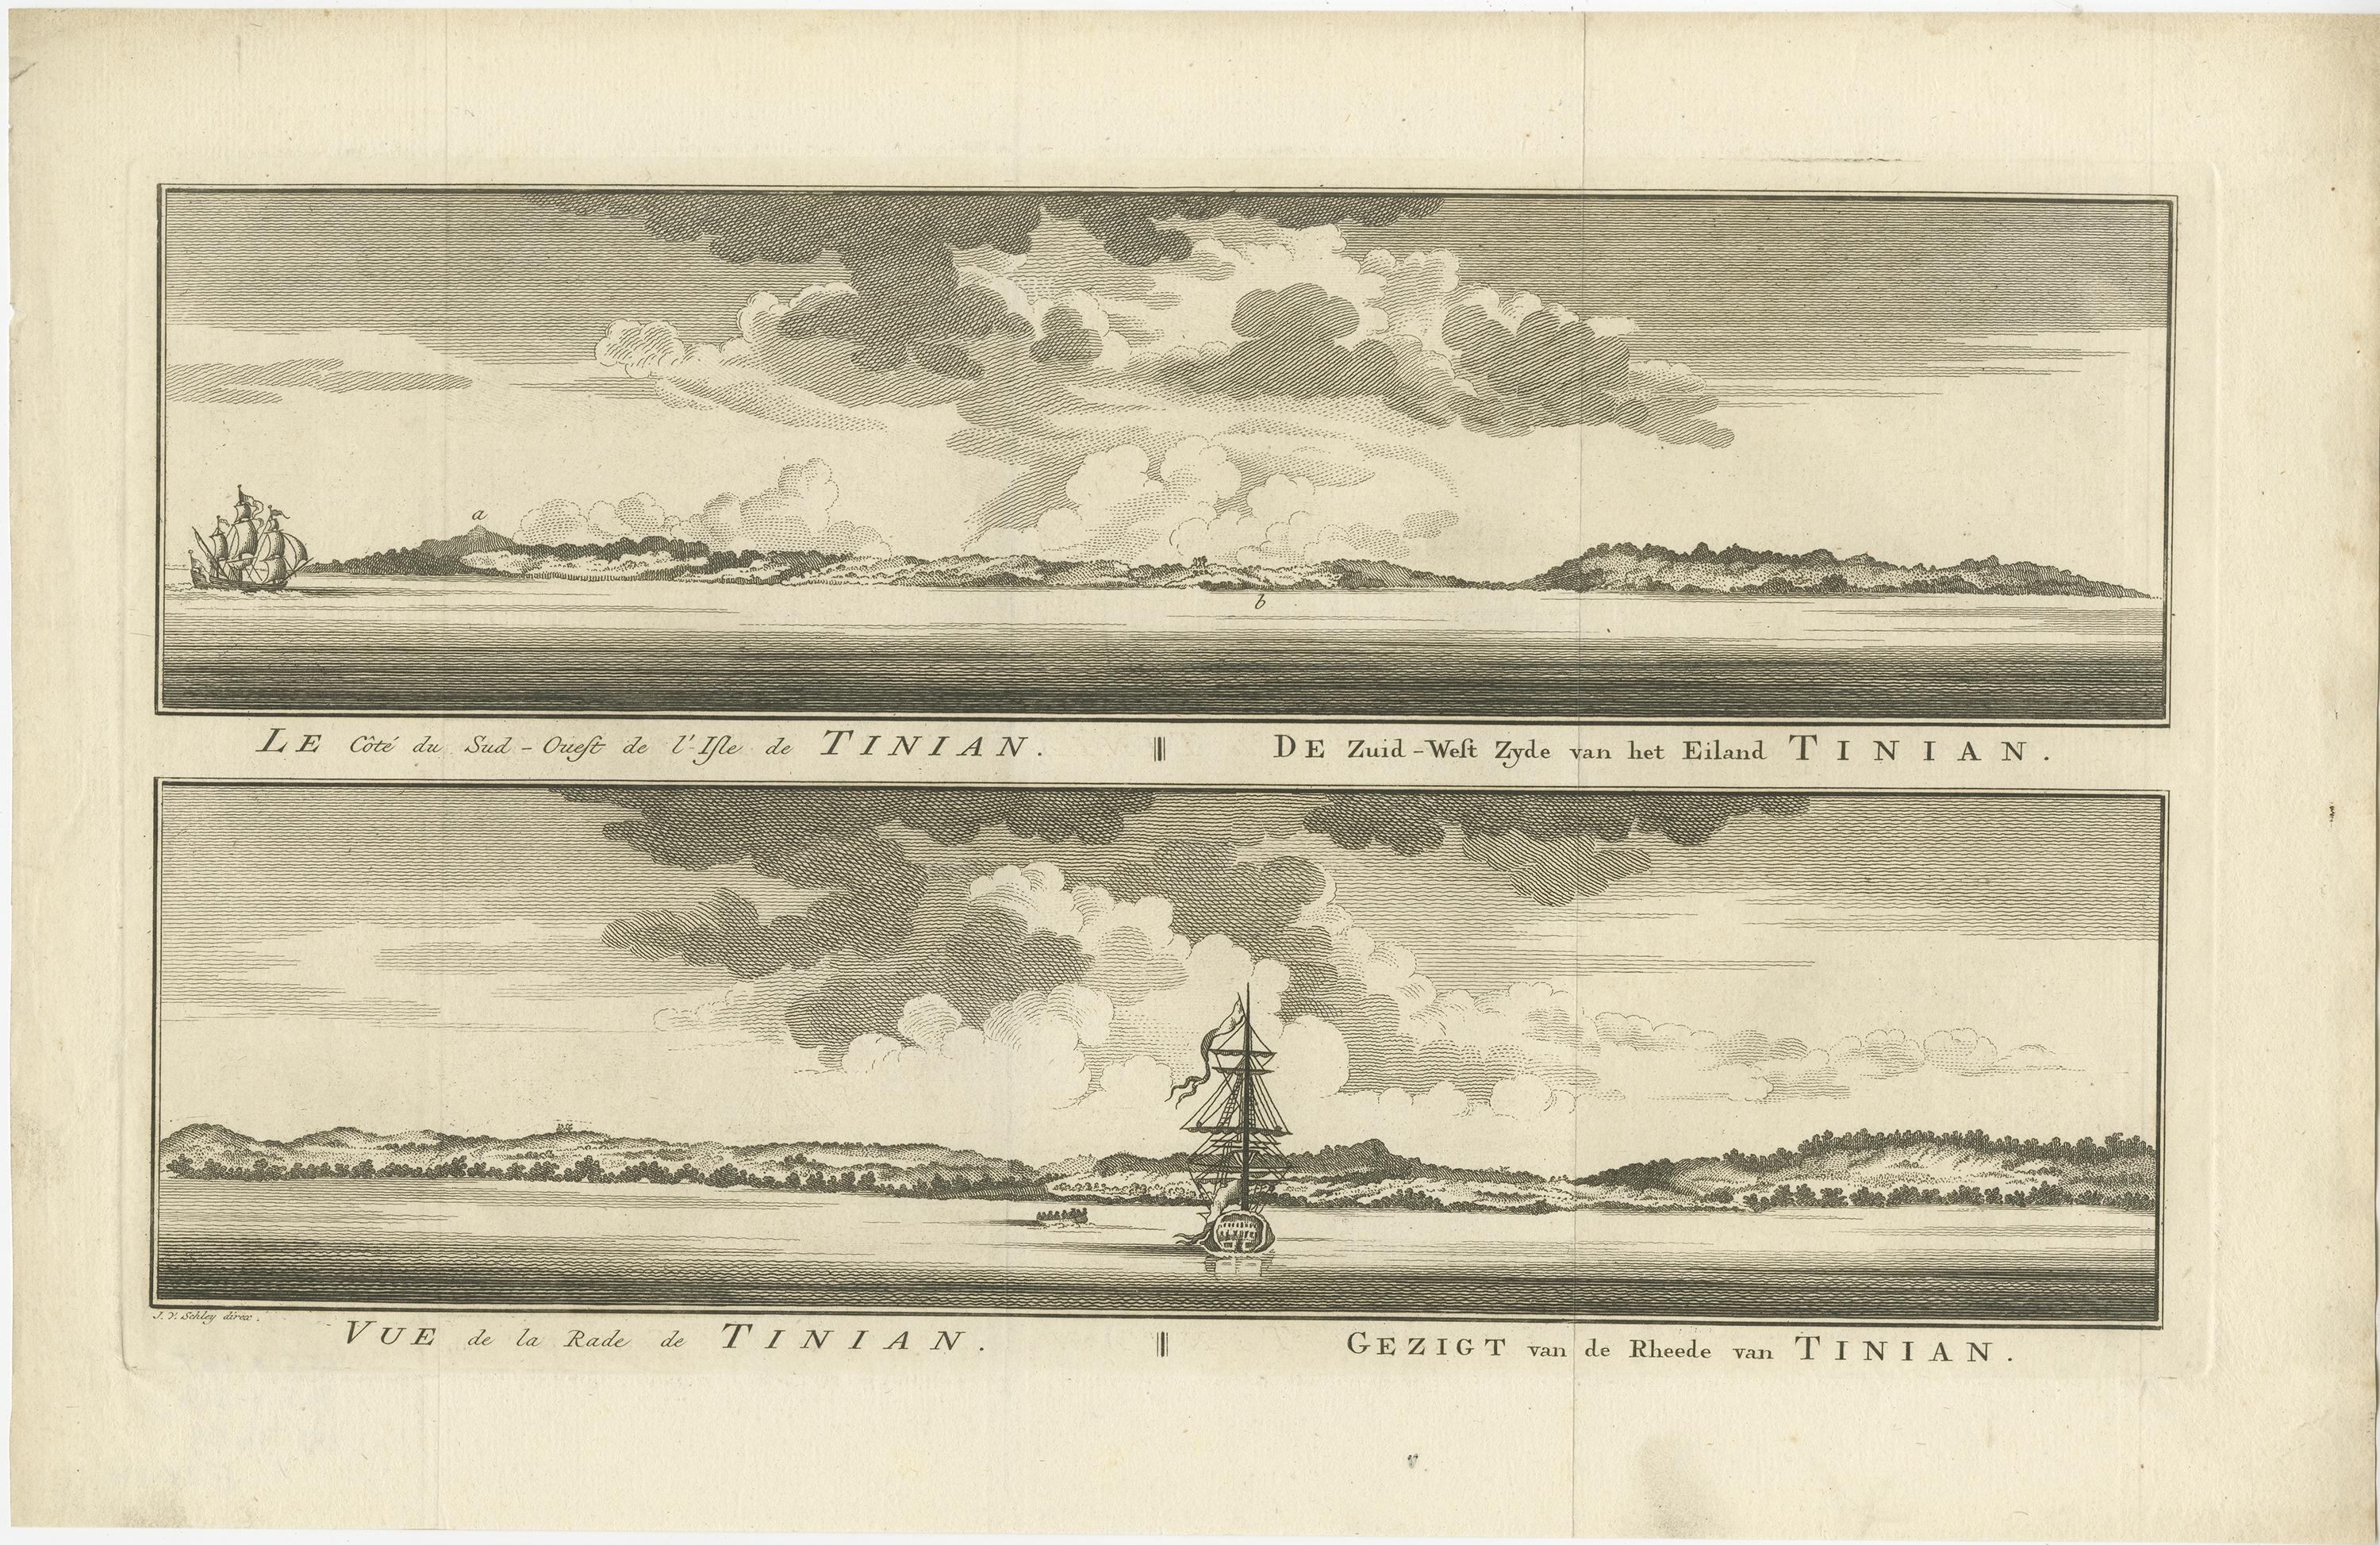 Antique print titled 'Vue de la Rde de Tinian 

Gezigt van de Rheede van Tinian (..)'. Views of the south-west side of the island of Tinian and a view of the anchorage of Tinian, where the Centurion got water. This print originates from 'Histoire